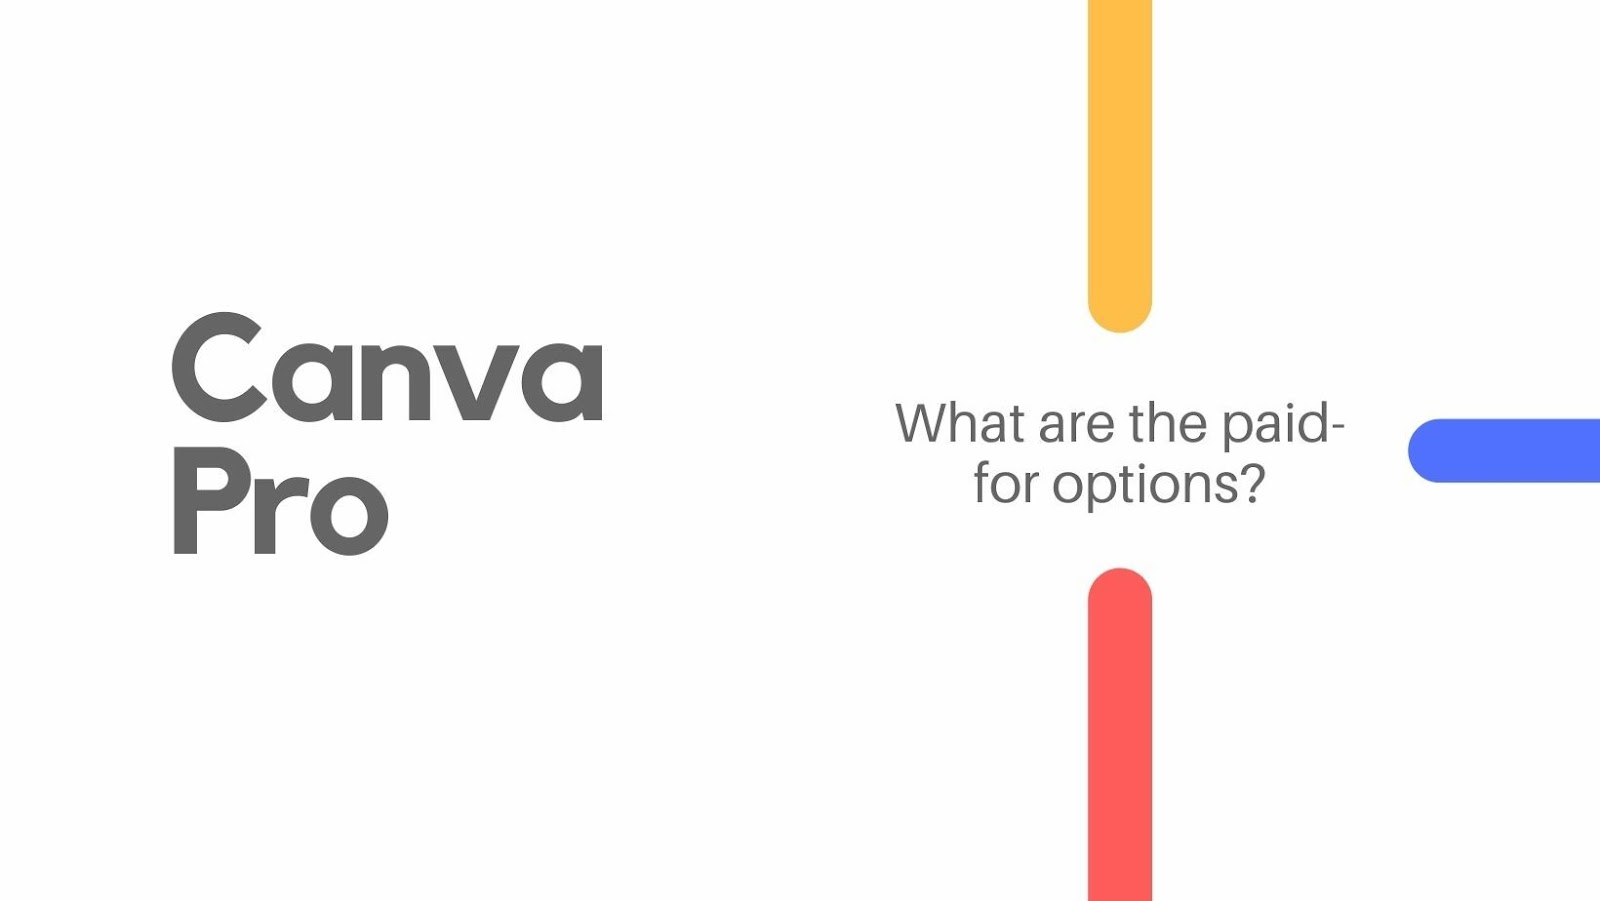 canva pro offers